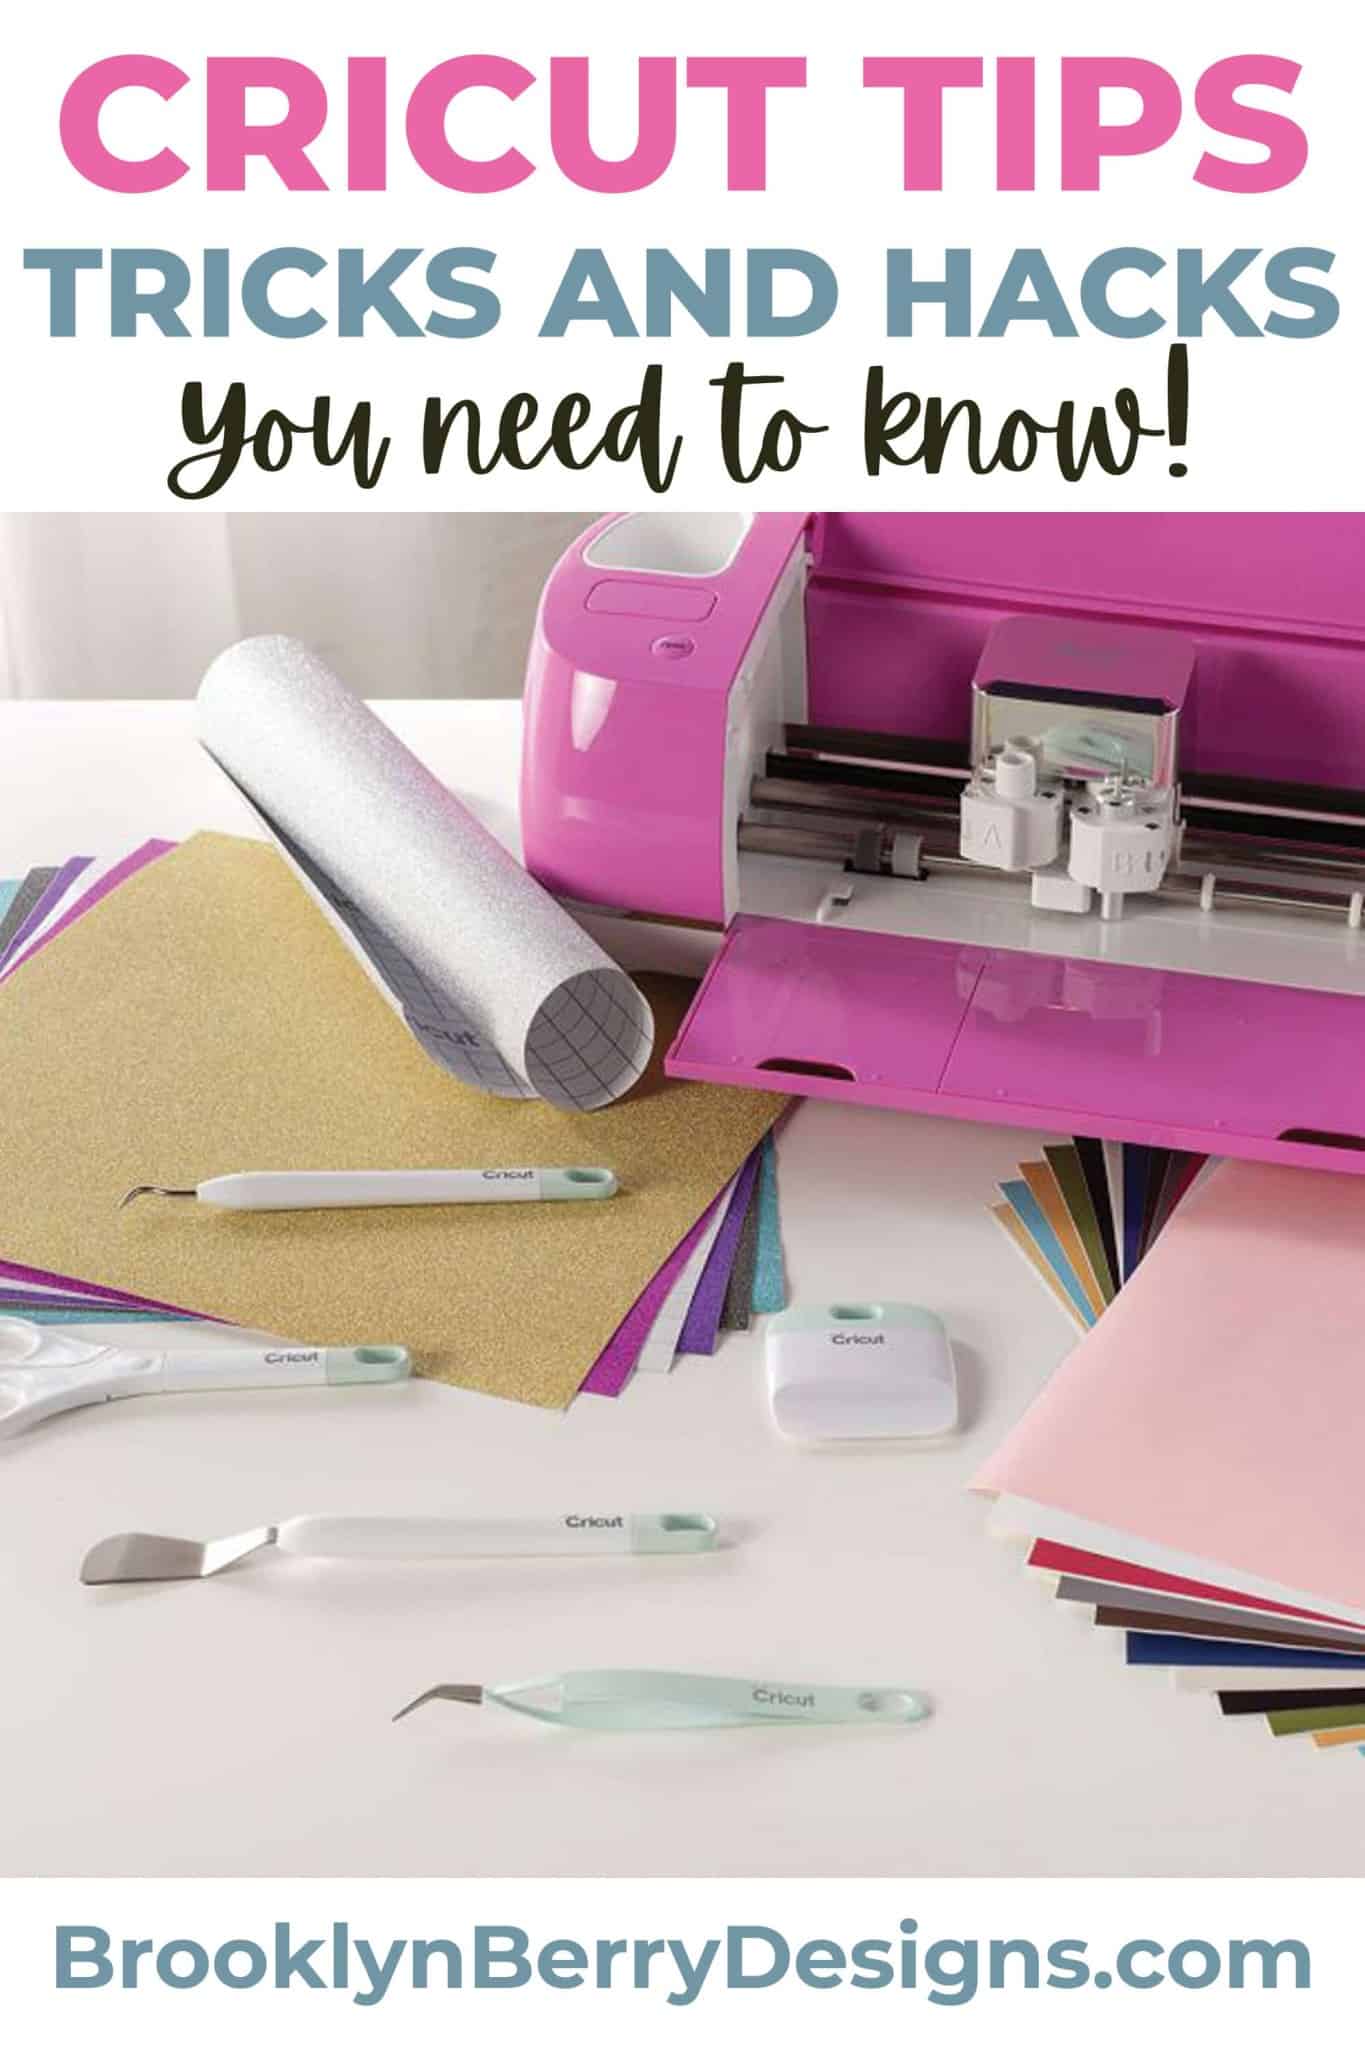 Cricut tips, tricks, and hacks - what you need to know for beginner cricut users. via @brookeberry